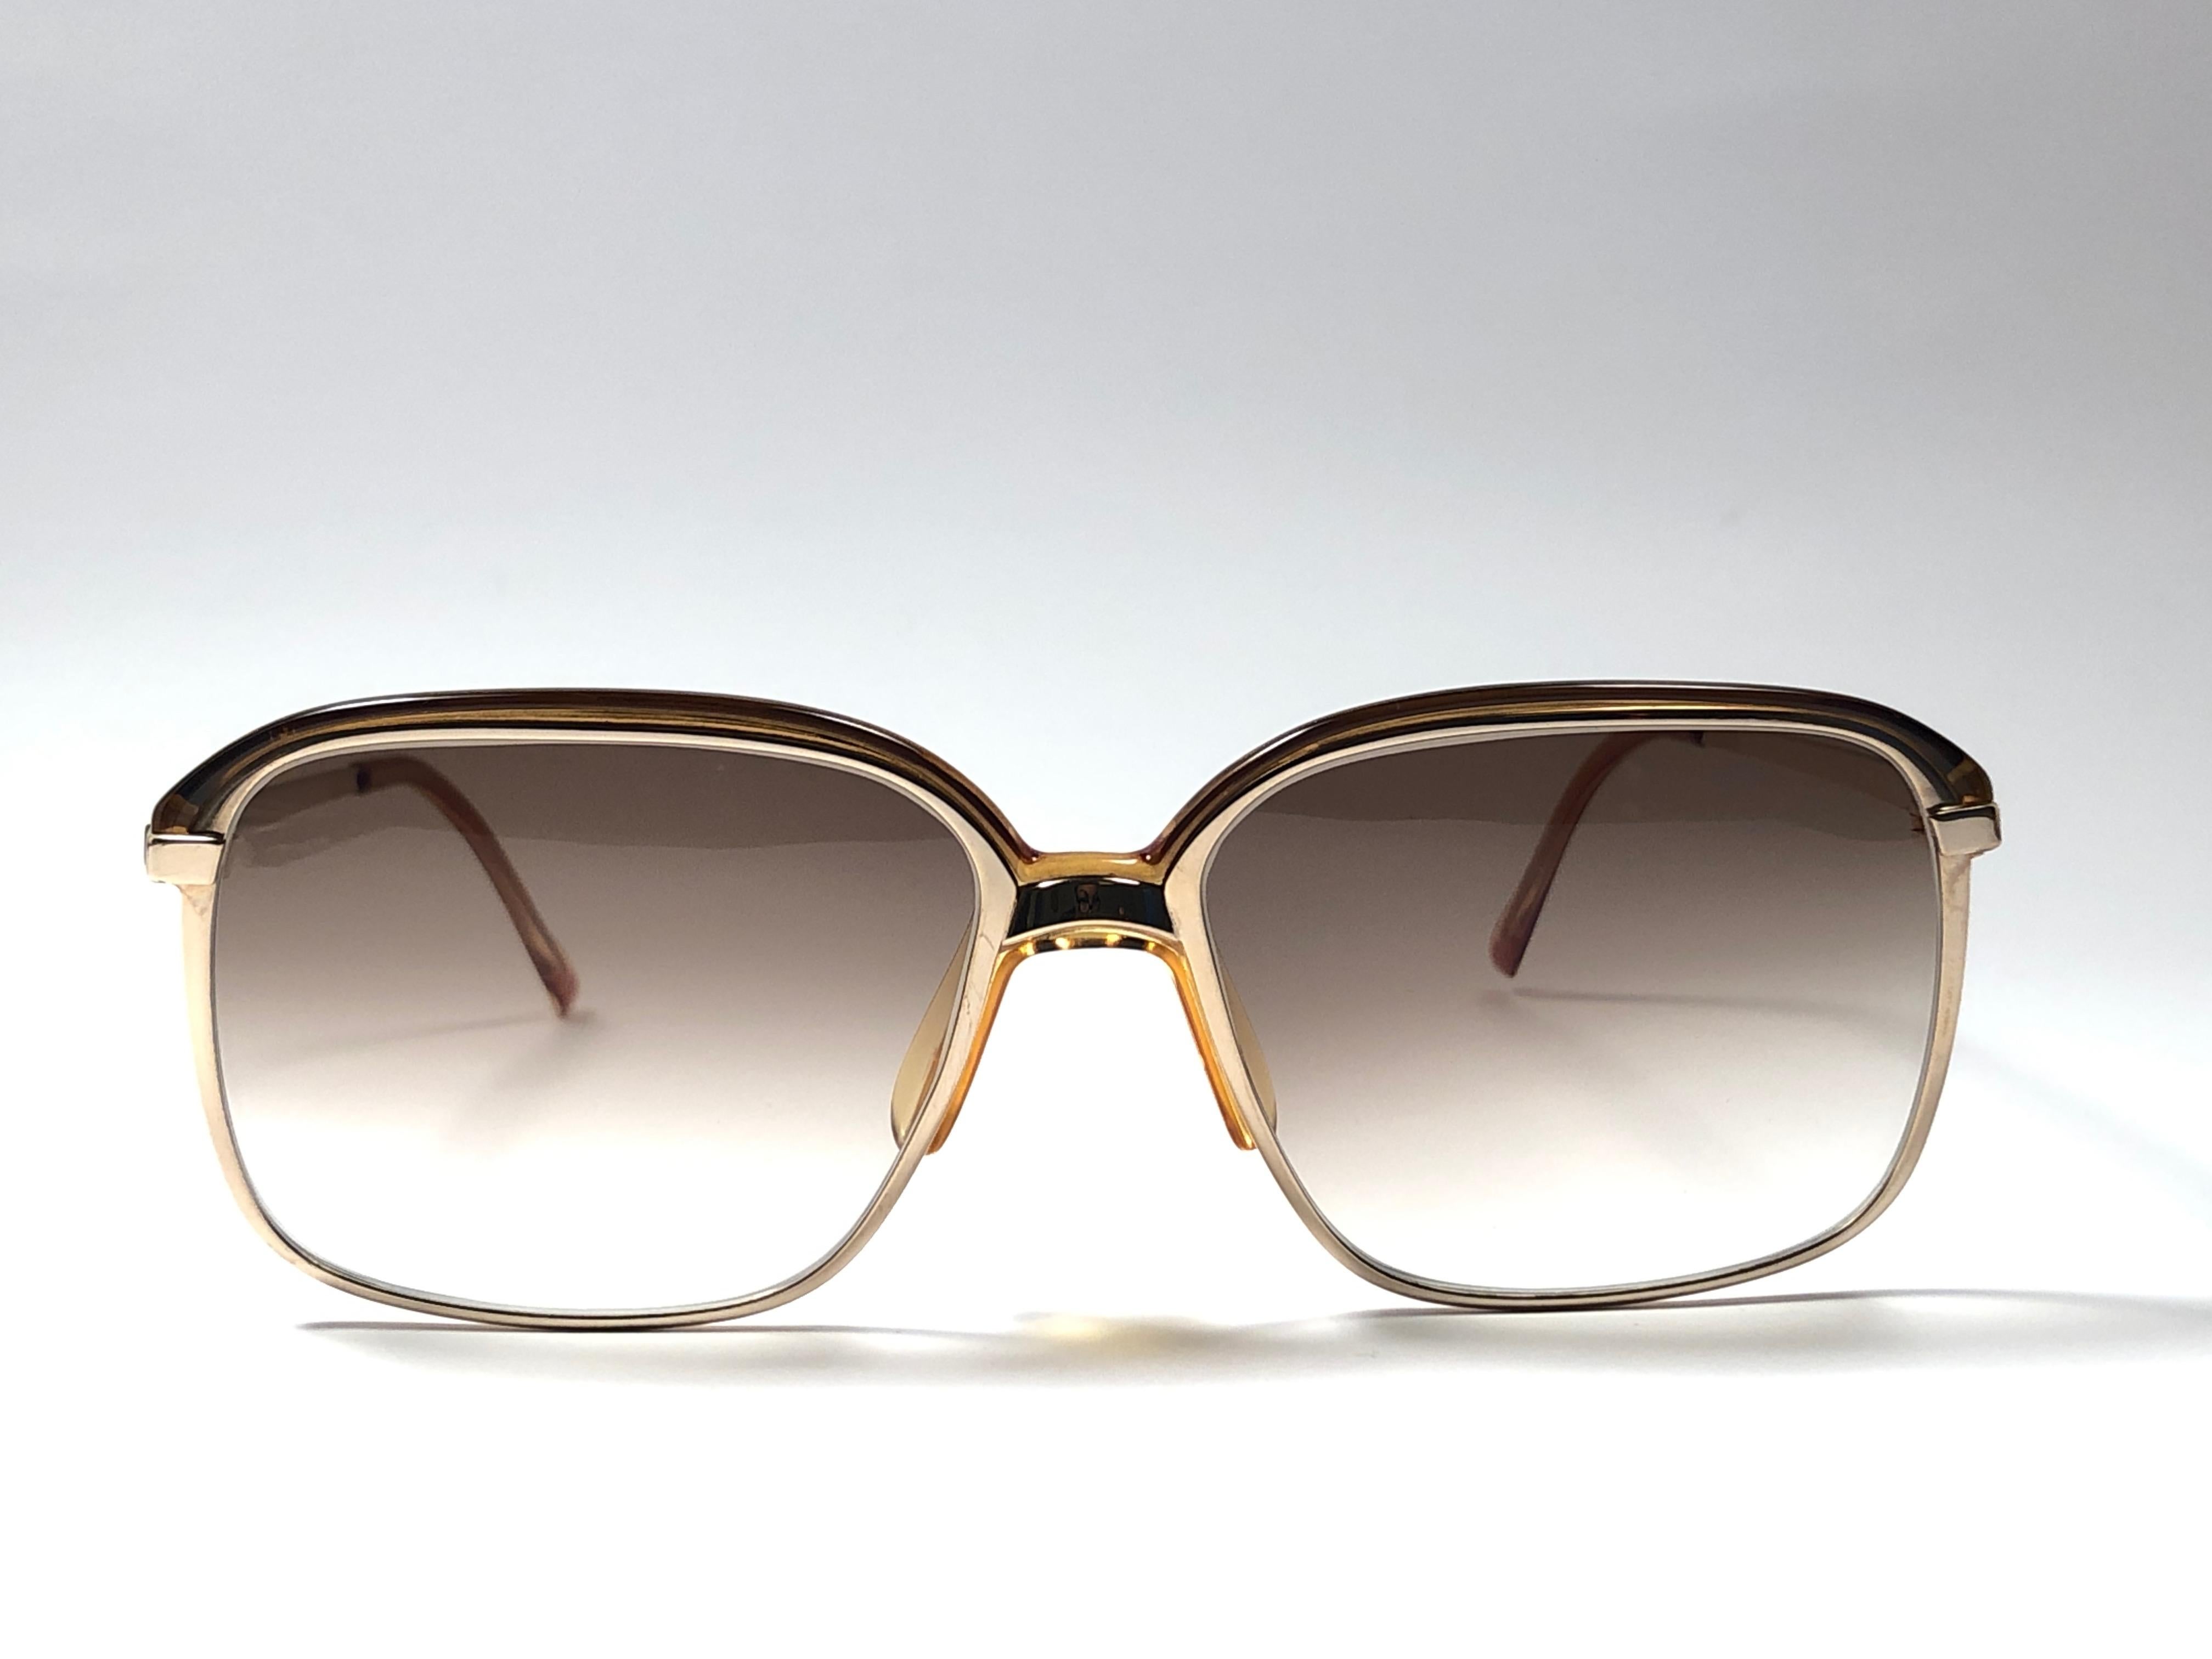 New vintage Christian Dior Monsieur gold & amber details frame.

Spotless brown gradient lenses.

Comes with it original CD Monsieur sleeve.

New, never worn or displayed this item may show light sign of wear due to storage.

Made in Austria